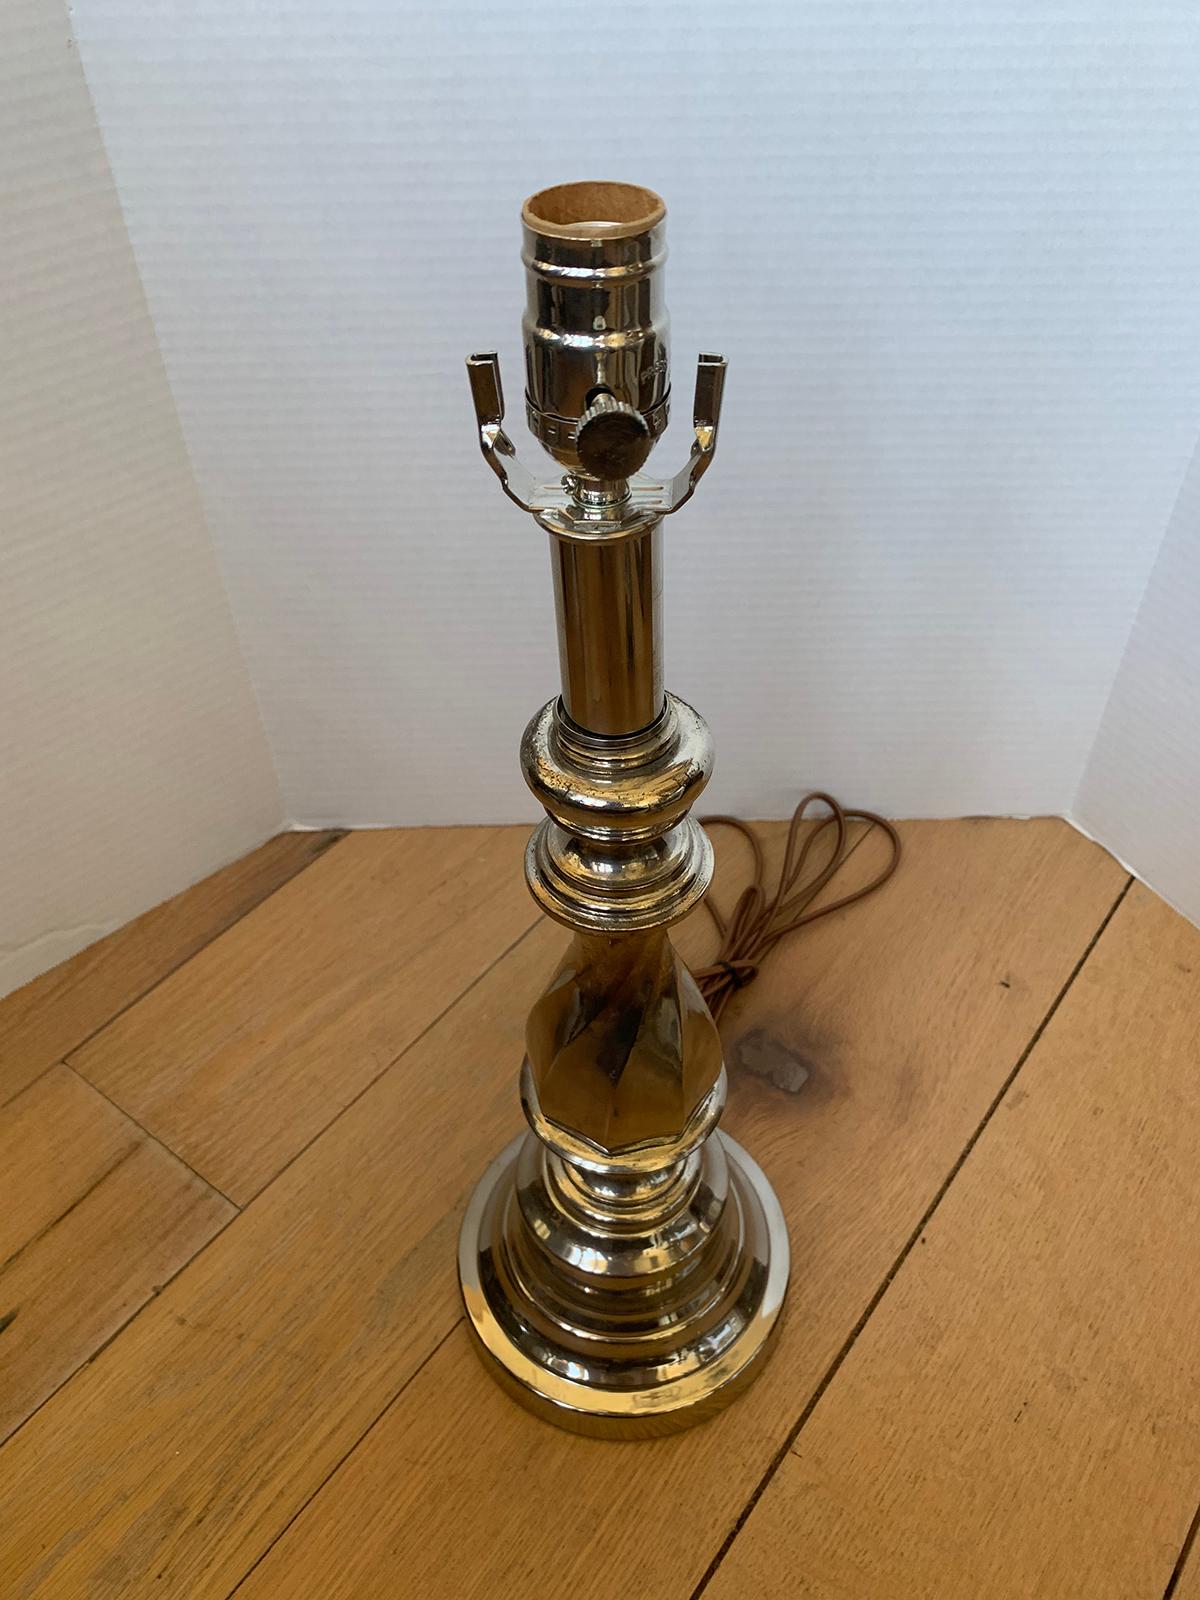 20th Century Nickel-Plated Lamp In Good Condition For Sale In Atlanta, GA